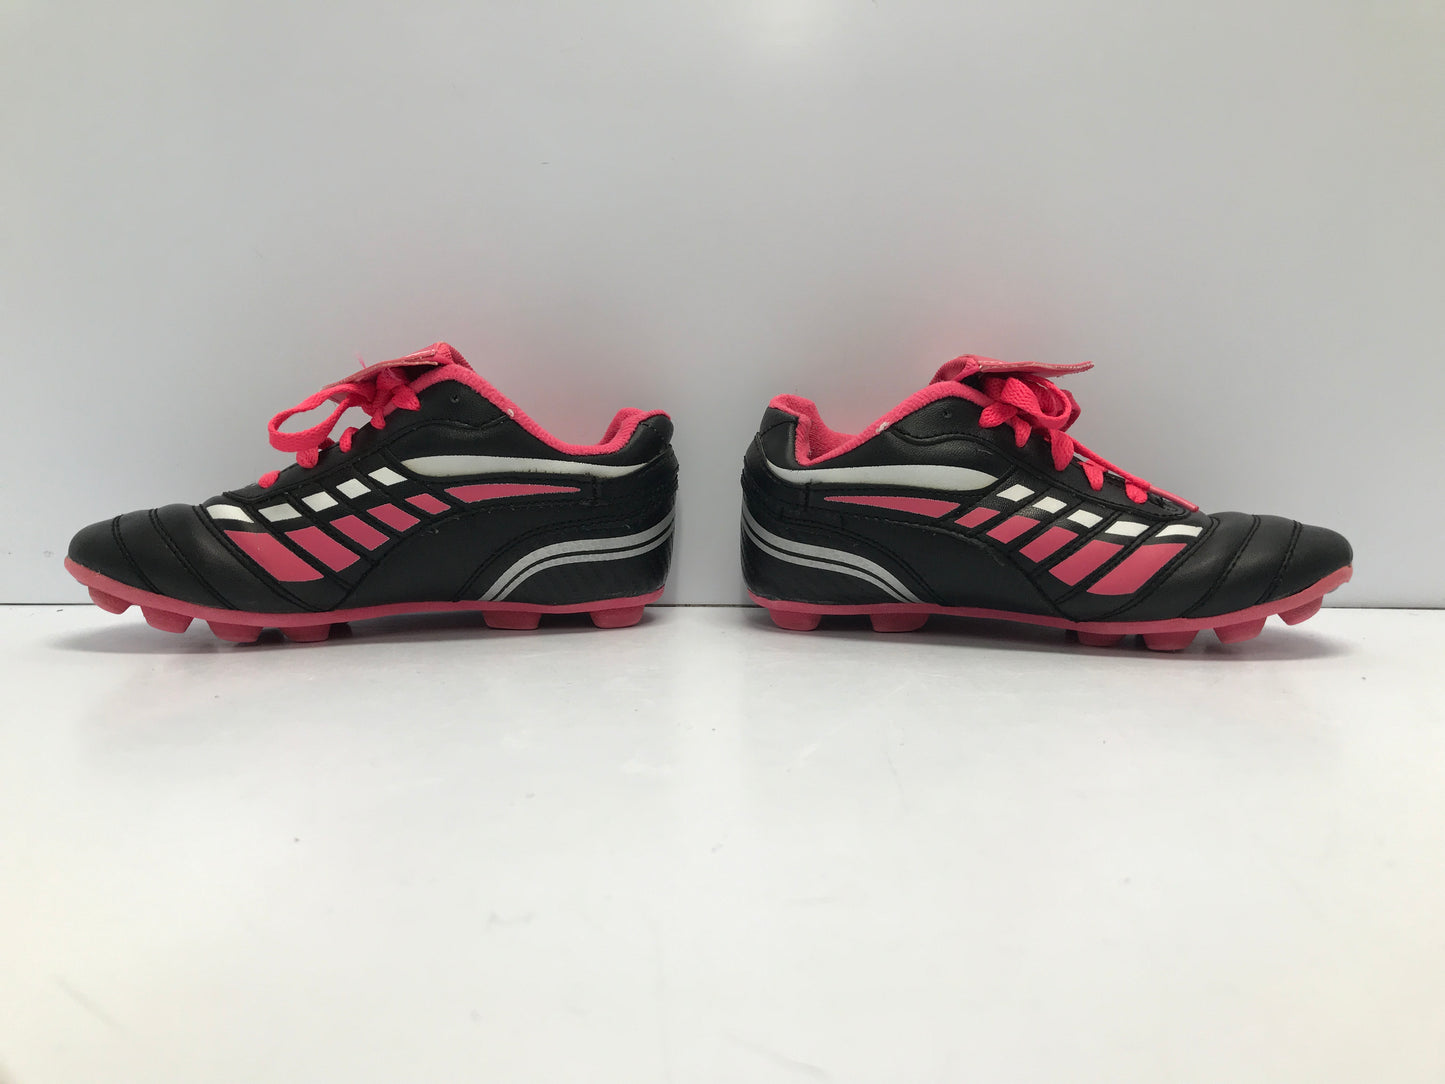 Soccer Shoes Cleats Child Size 1 Athlete Pink Black